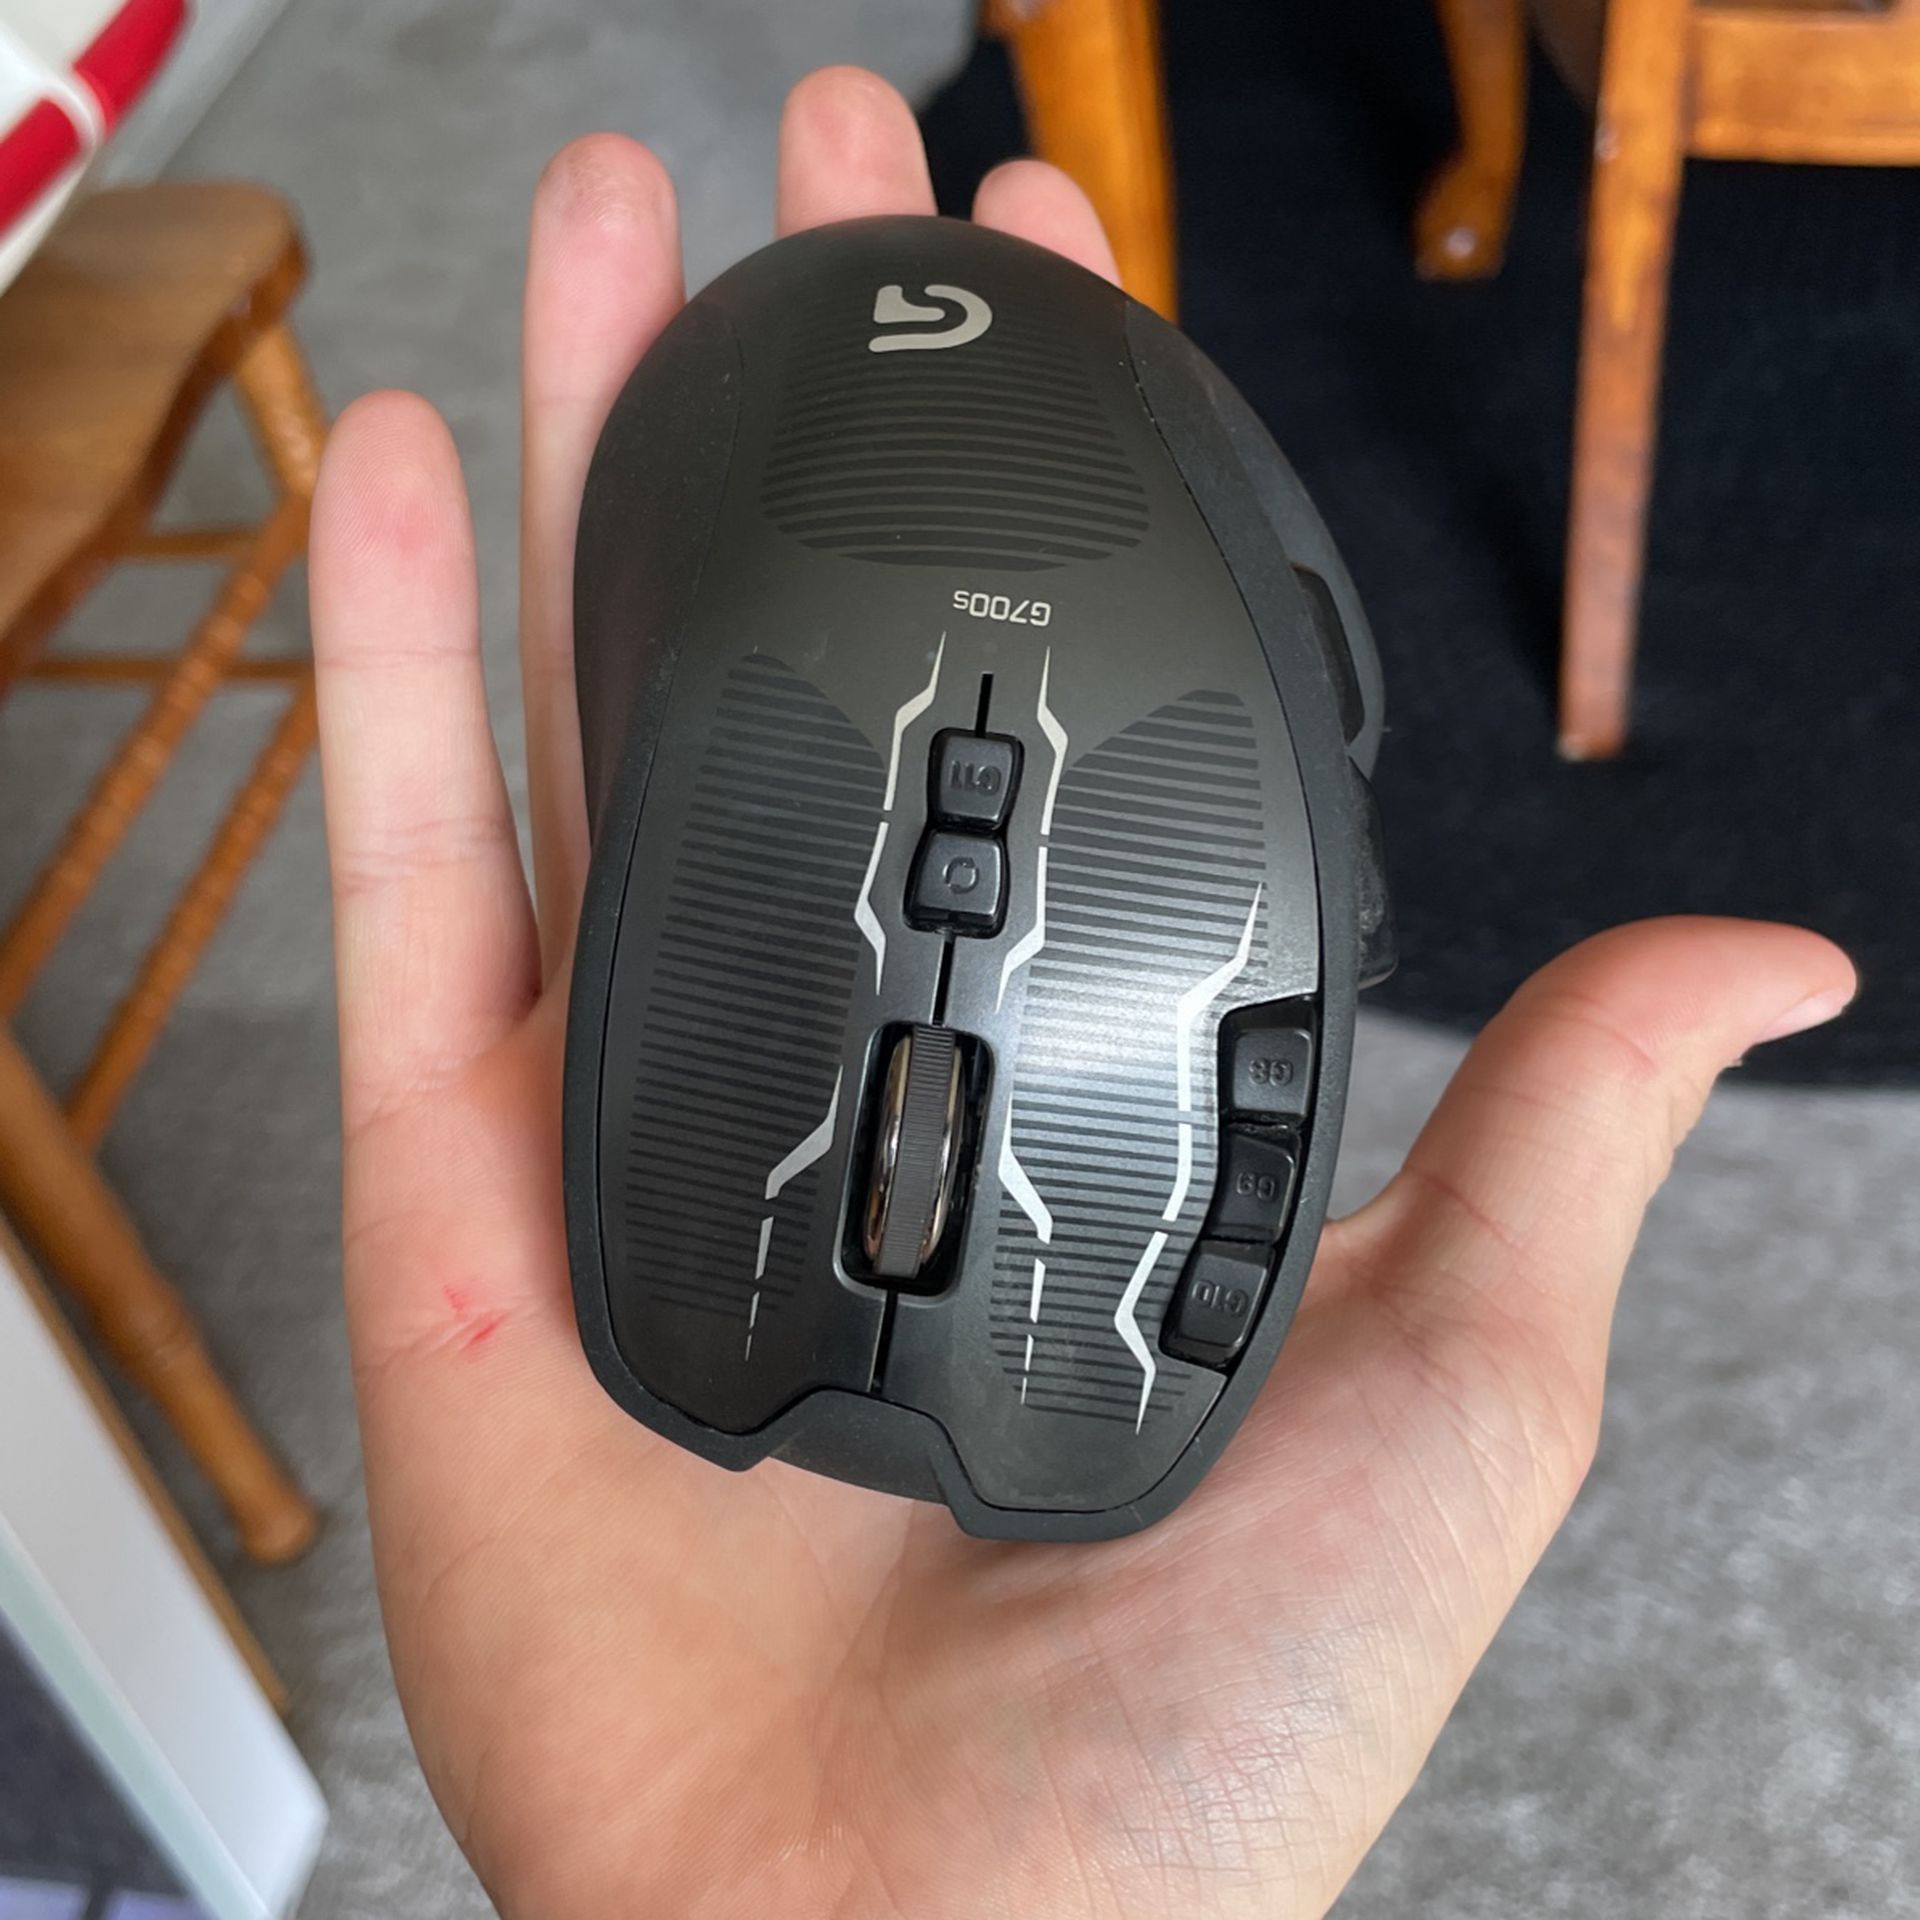 Used Logitech G700s Wireless Laser Mouse